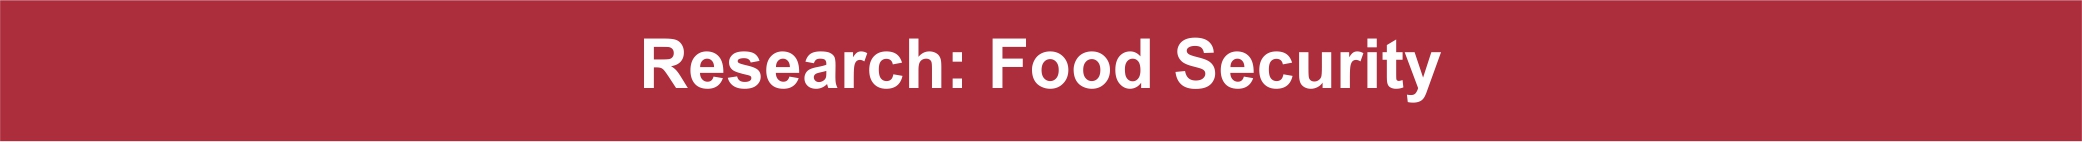 Food Security Research